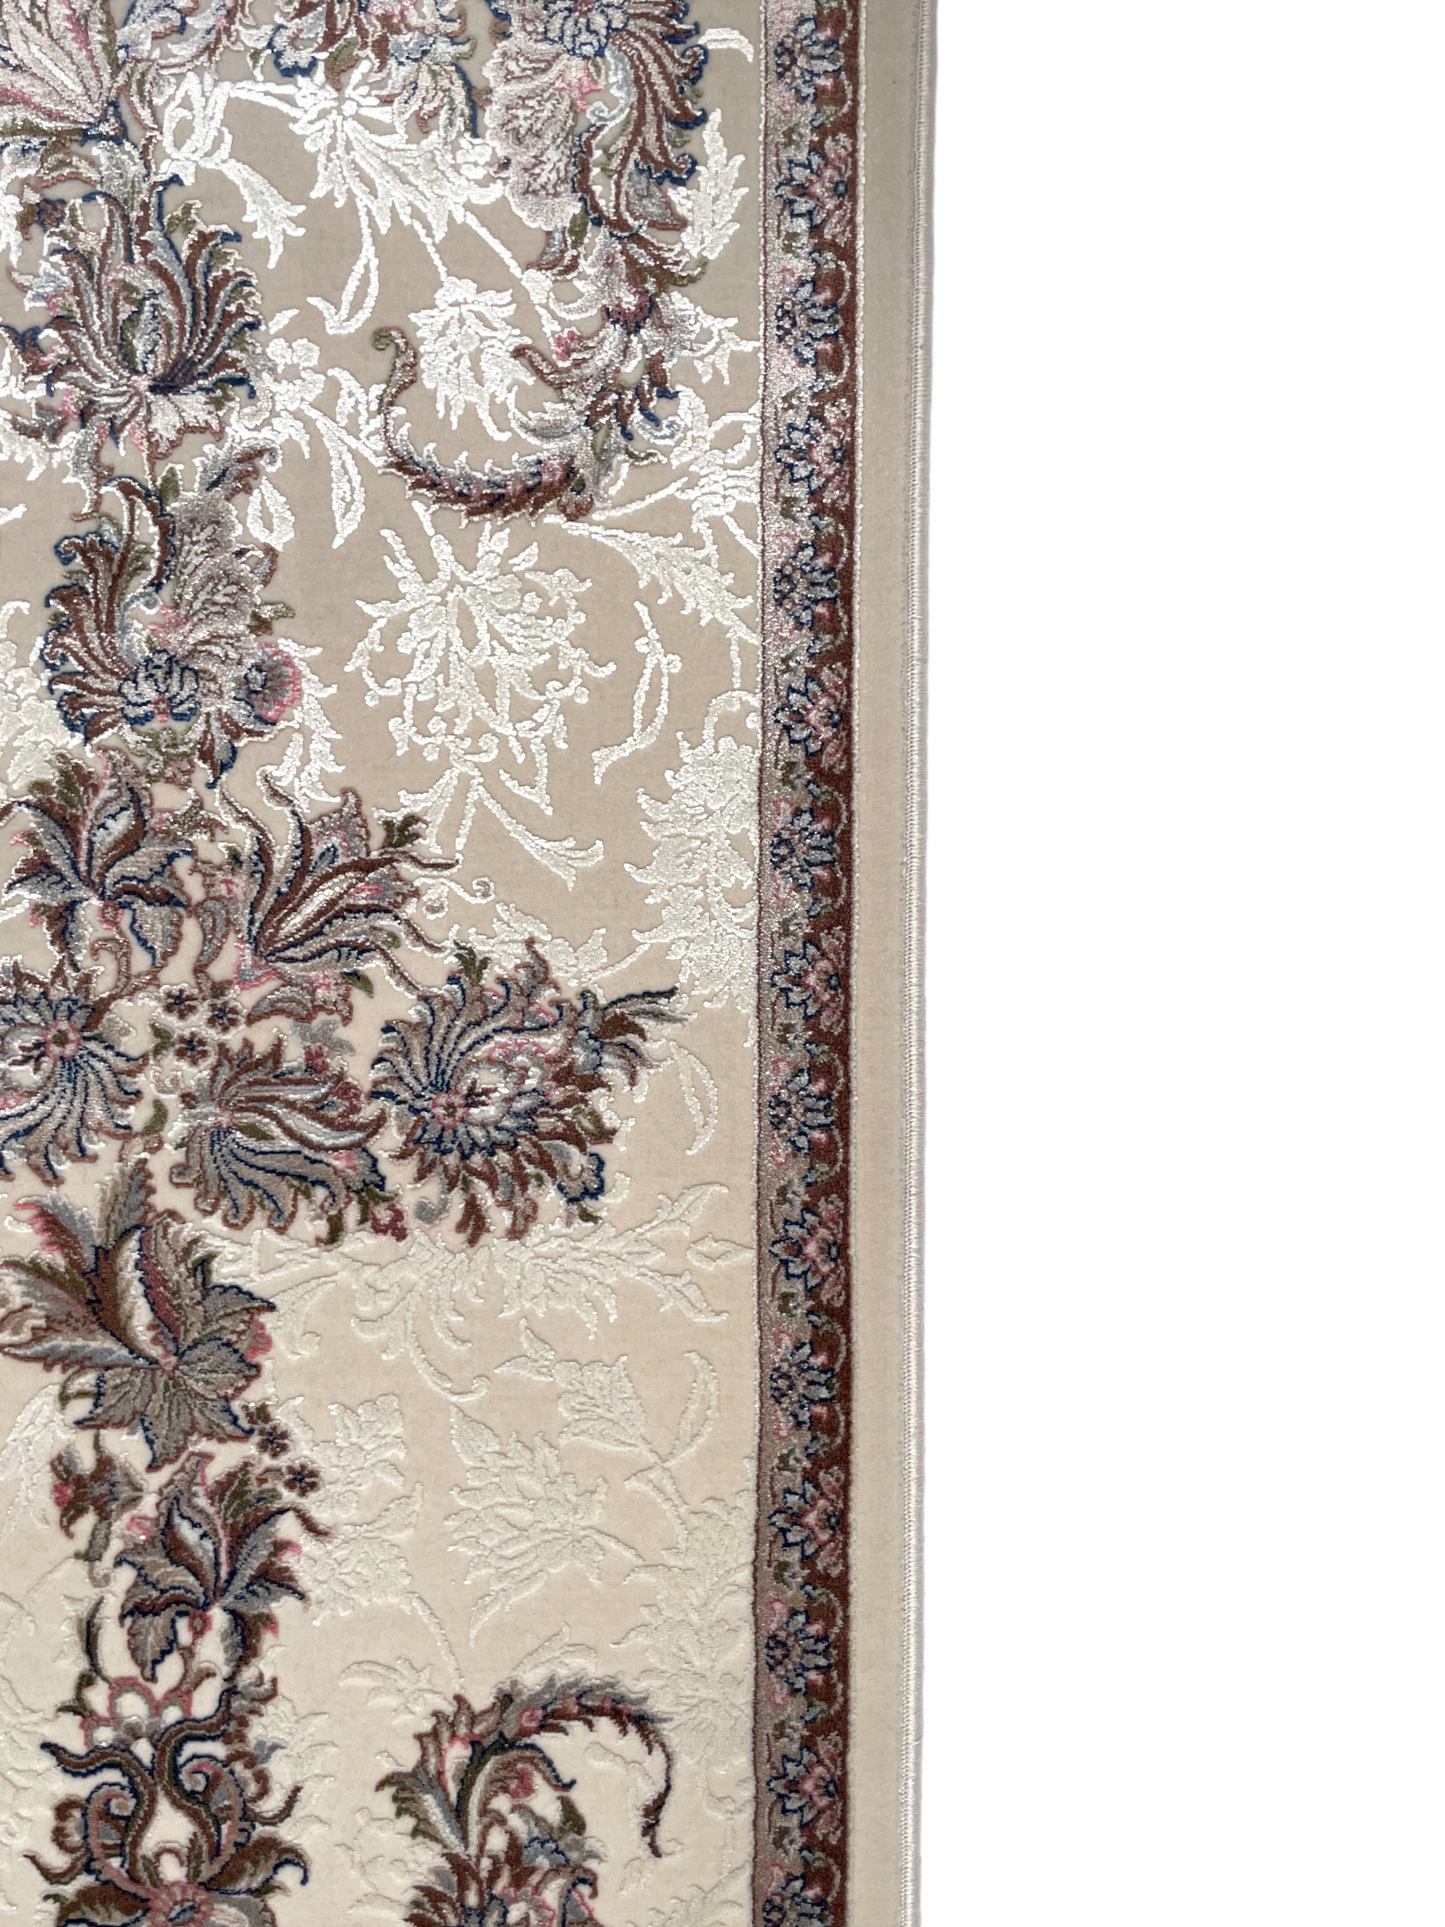 The Ishara rug displays the traditional Islamic "mihrab" design with a textured floral pattern.